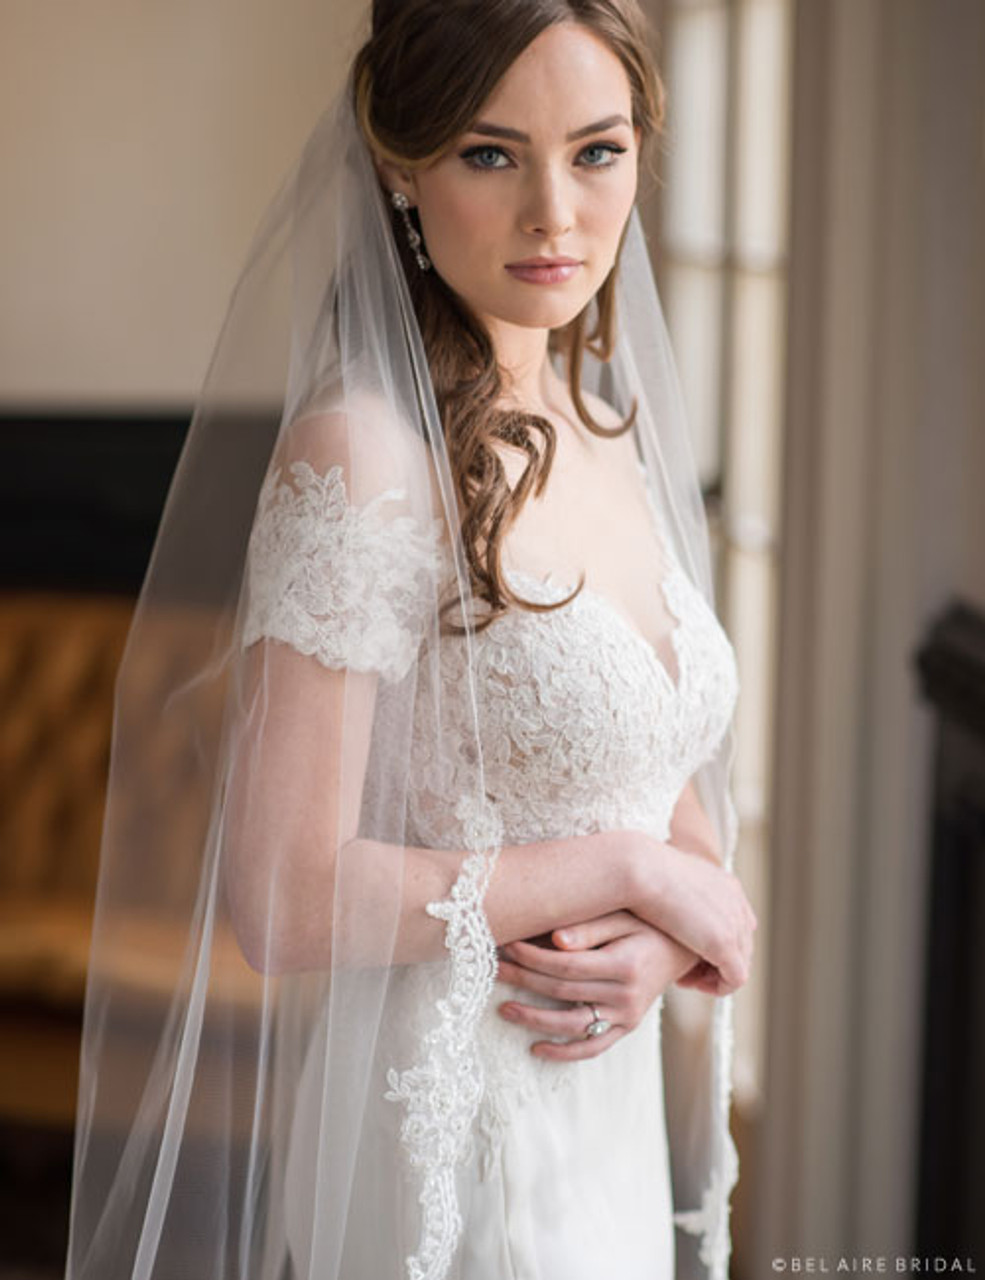 Waltz Length Veil with Pencil Edge |  Off-White / 108 Inches / 108 Inches